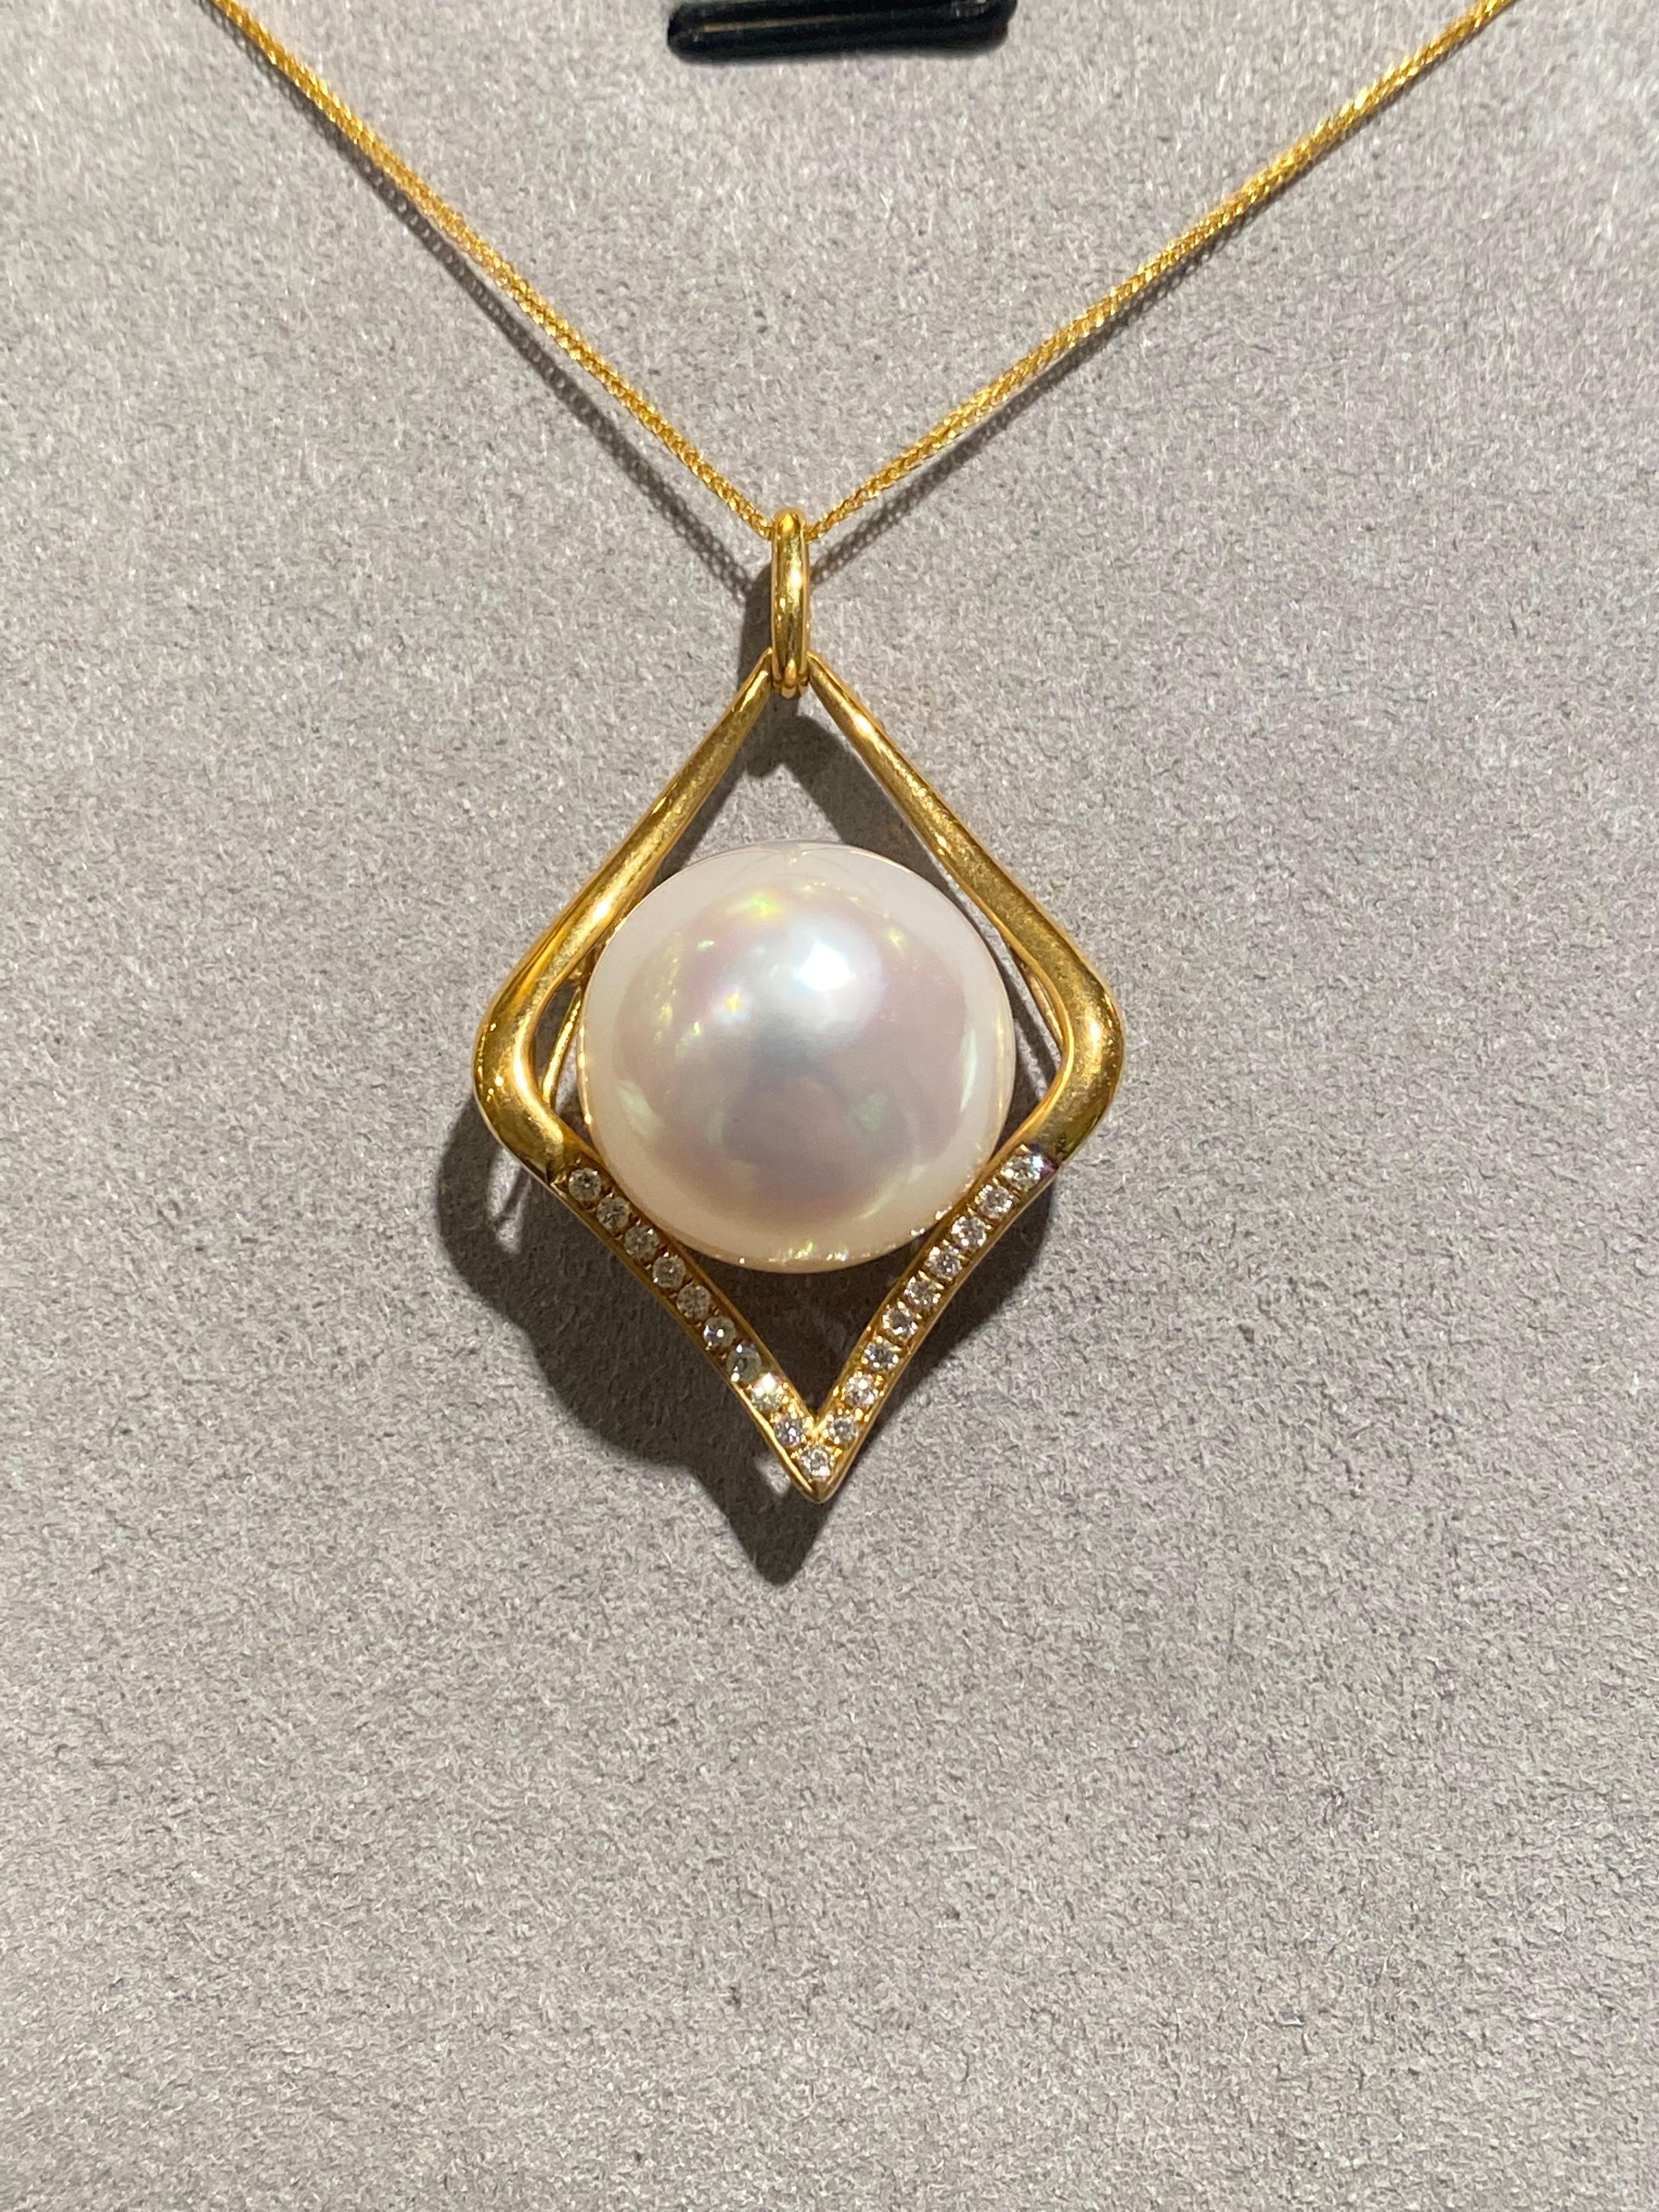 A White Australian South Sea Pearl and diamond pendant in 18k Yellow gold. The pendant is of kite shape with diamonds pave at the opposite side of the bale. The pearl is of button shape and measuring 15.5mm x 16mm. The pearl is white in colour with